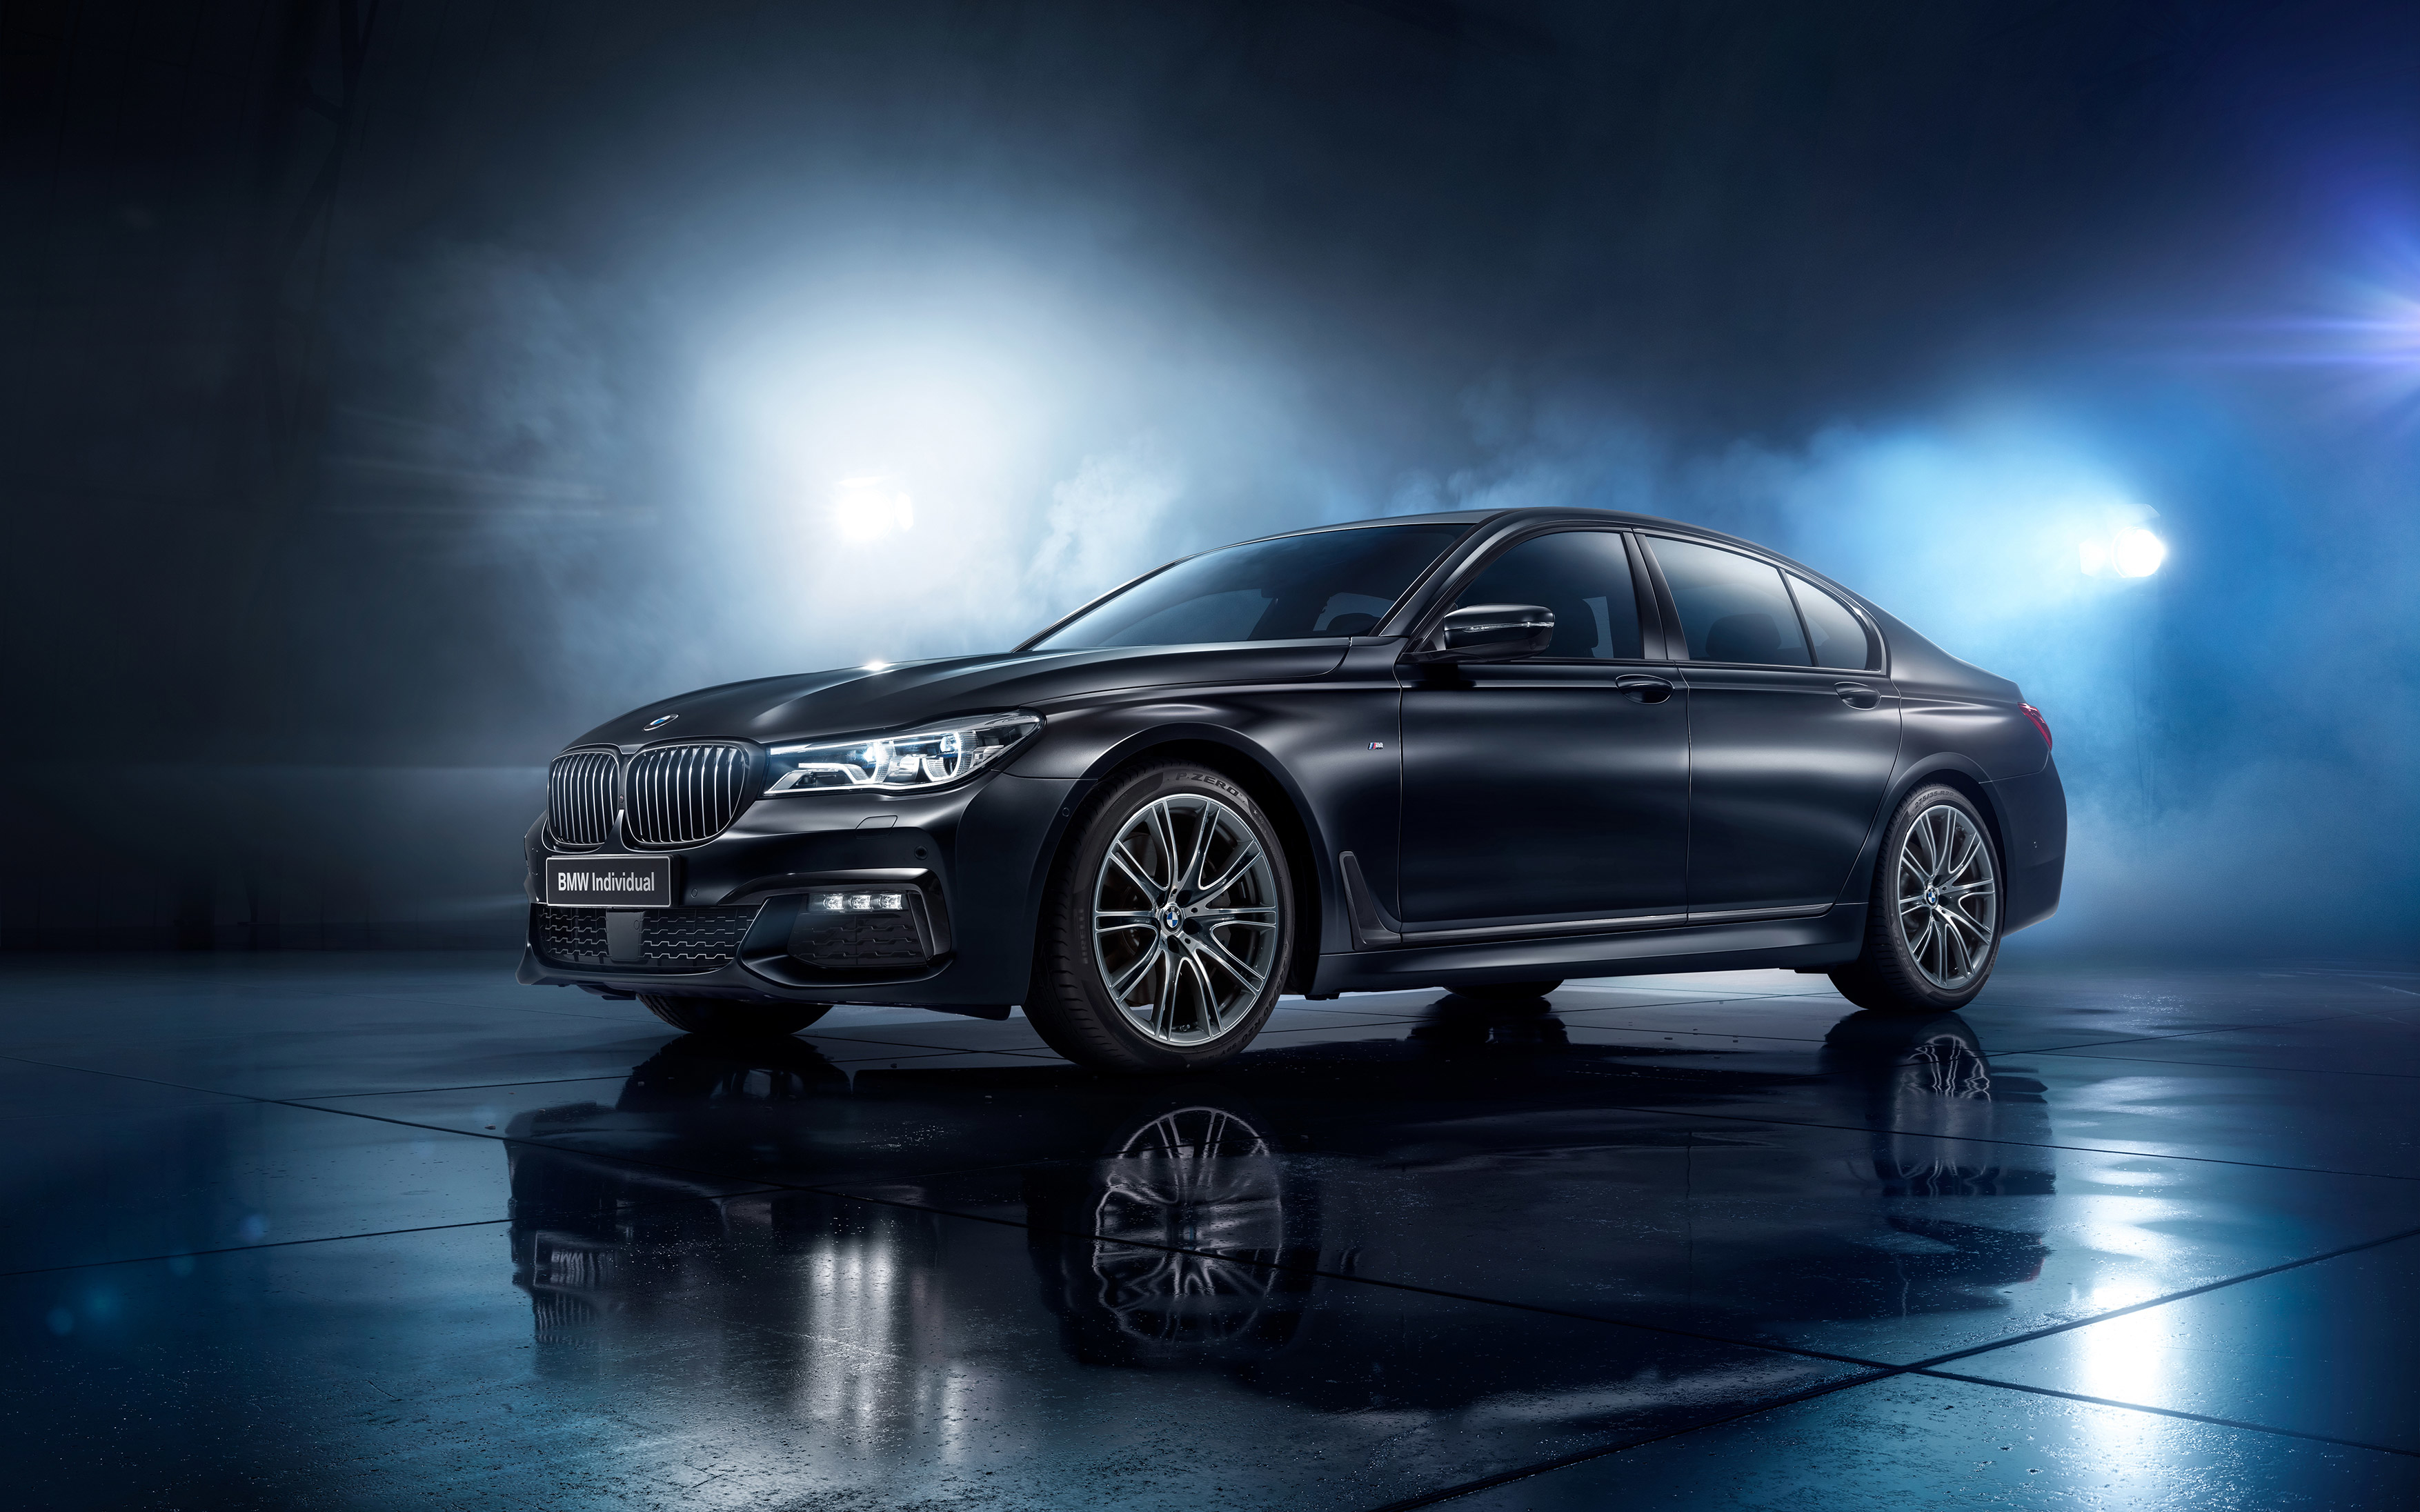 BMW 750i Black Ice Edition 2017 Wallpaper, HD Cars 4K Wallpapers ...